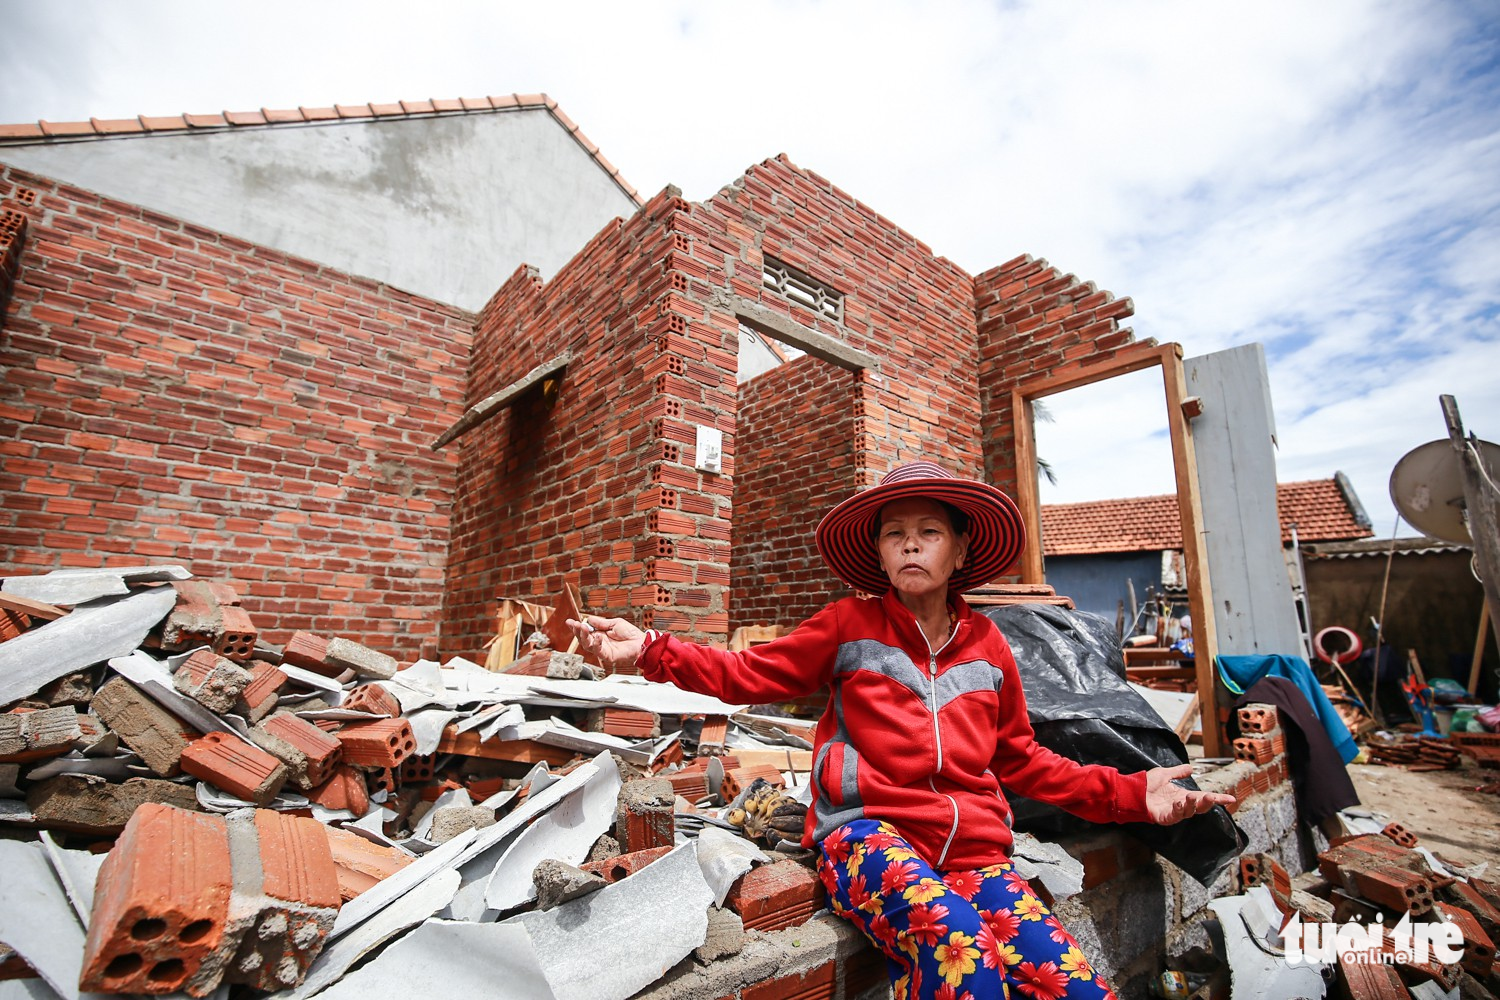 Phan Thi Lac, 63, sits by the debris of her home in Van Phuoc Commune.